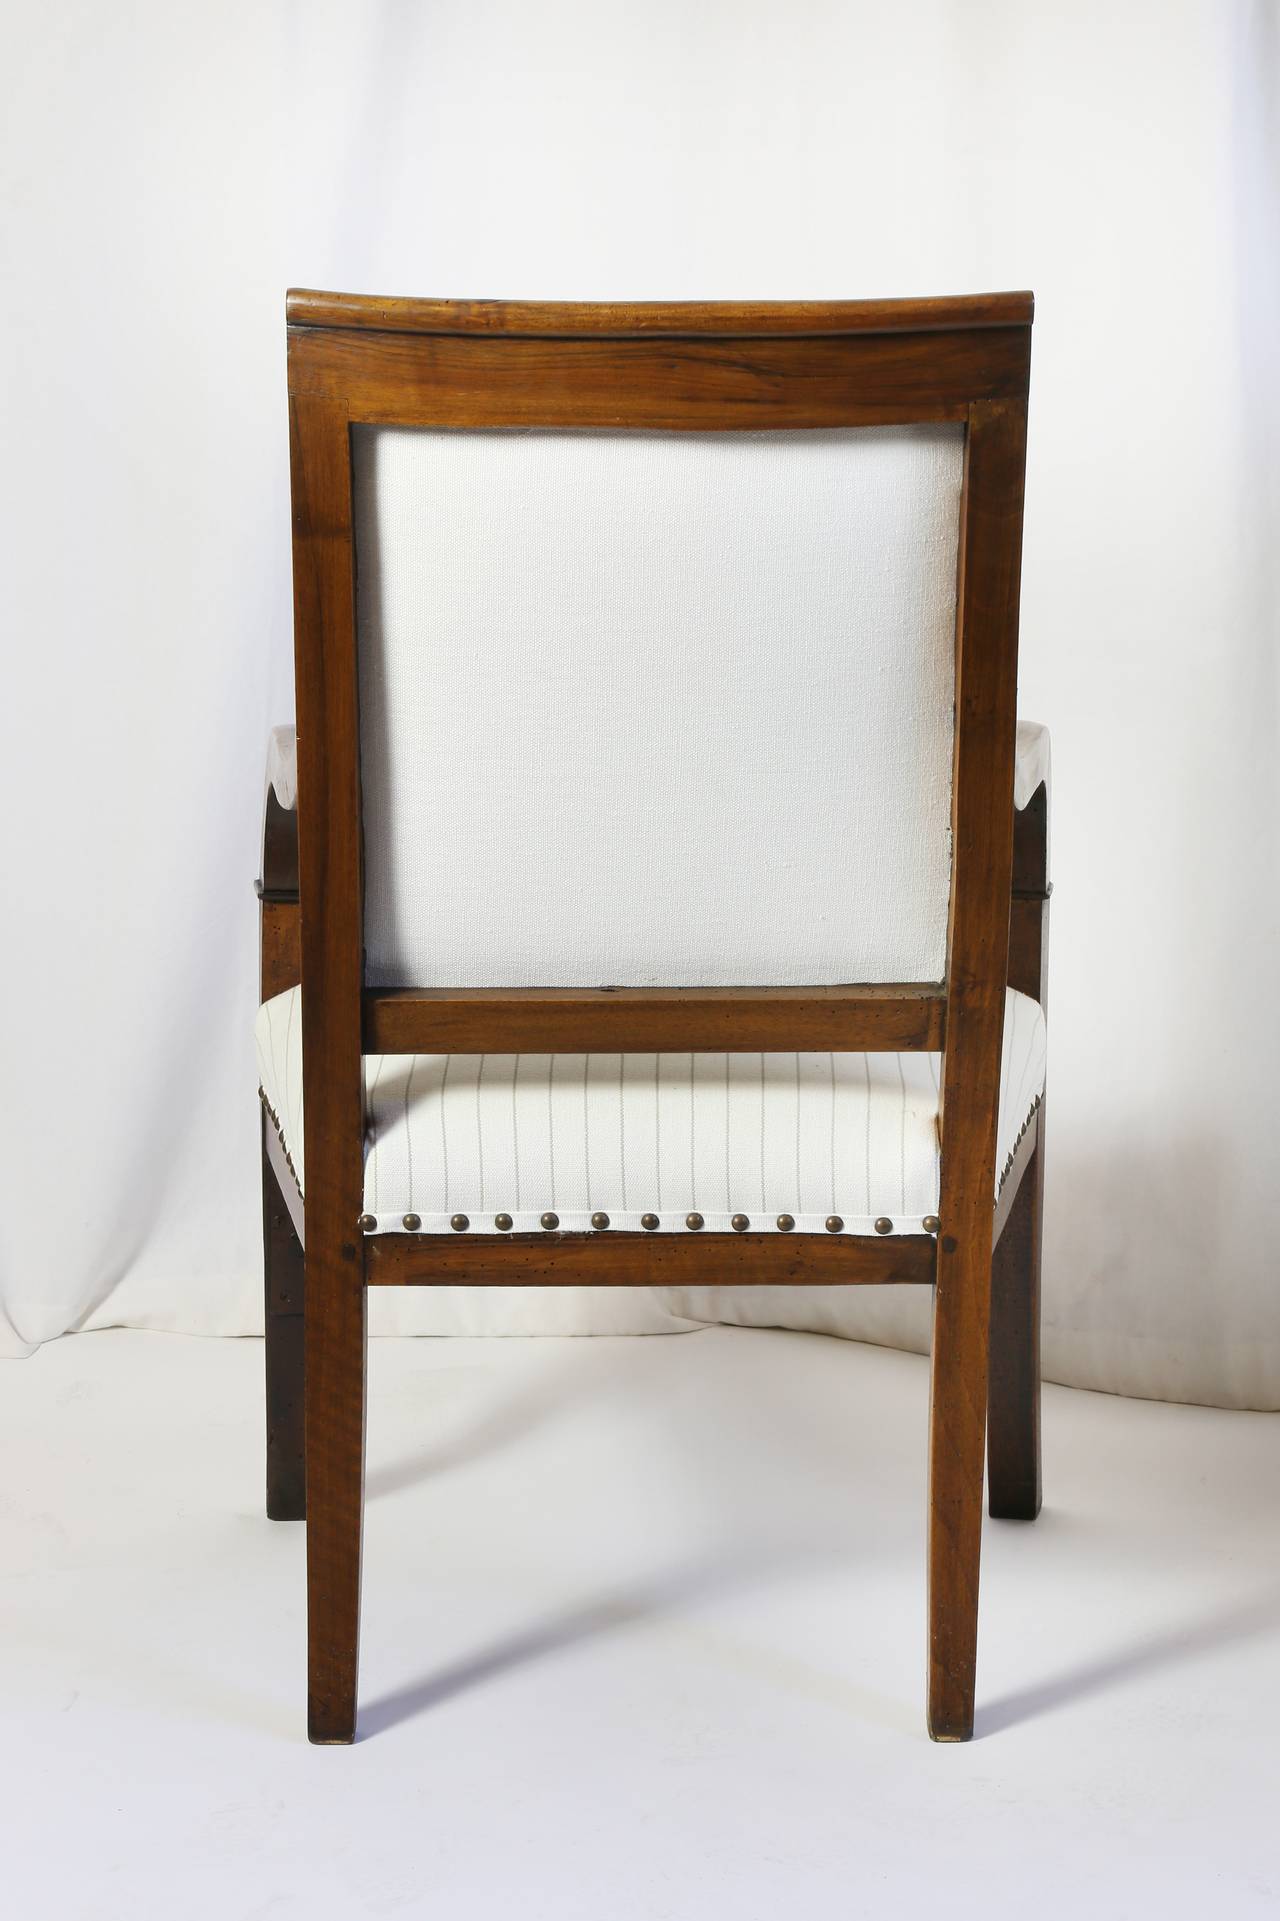 French Provincial walnut arm chairs, the crest rail over the upholstered center back and seat with framing arms extending to the slightly curved legs. New upholstery in striped linen with nail head detail.